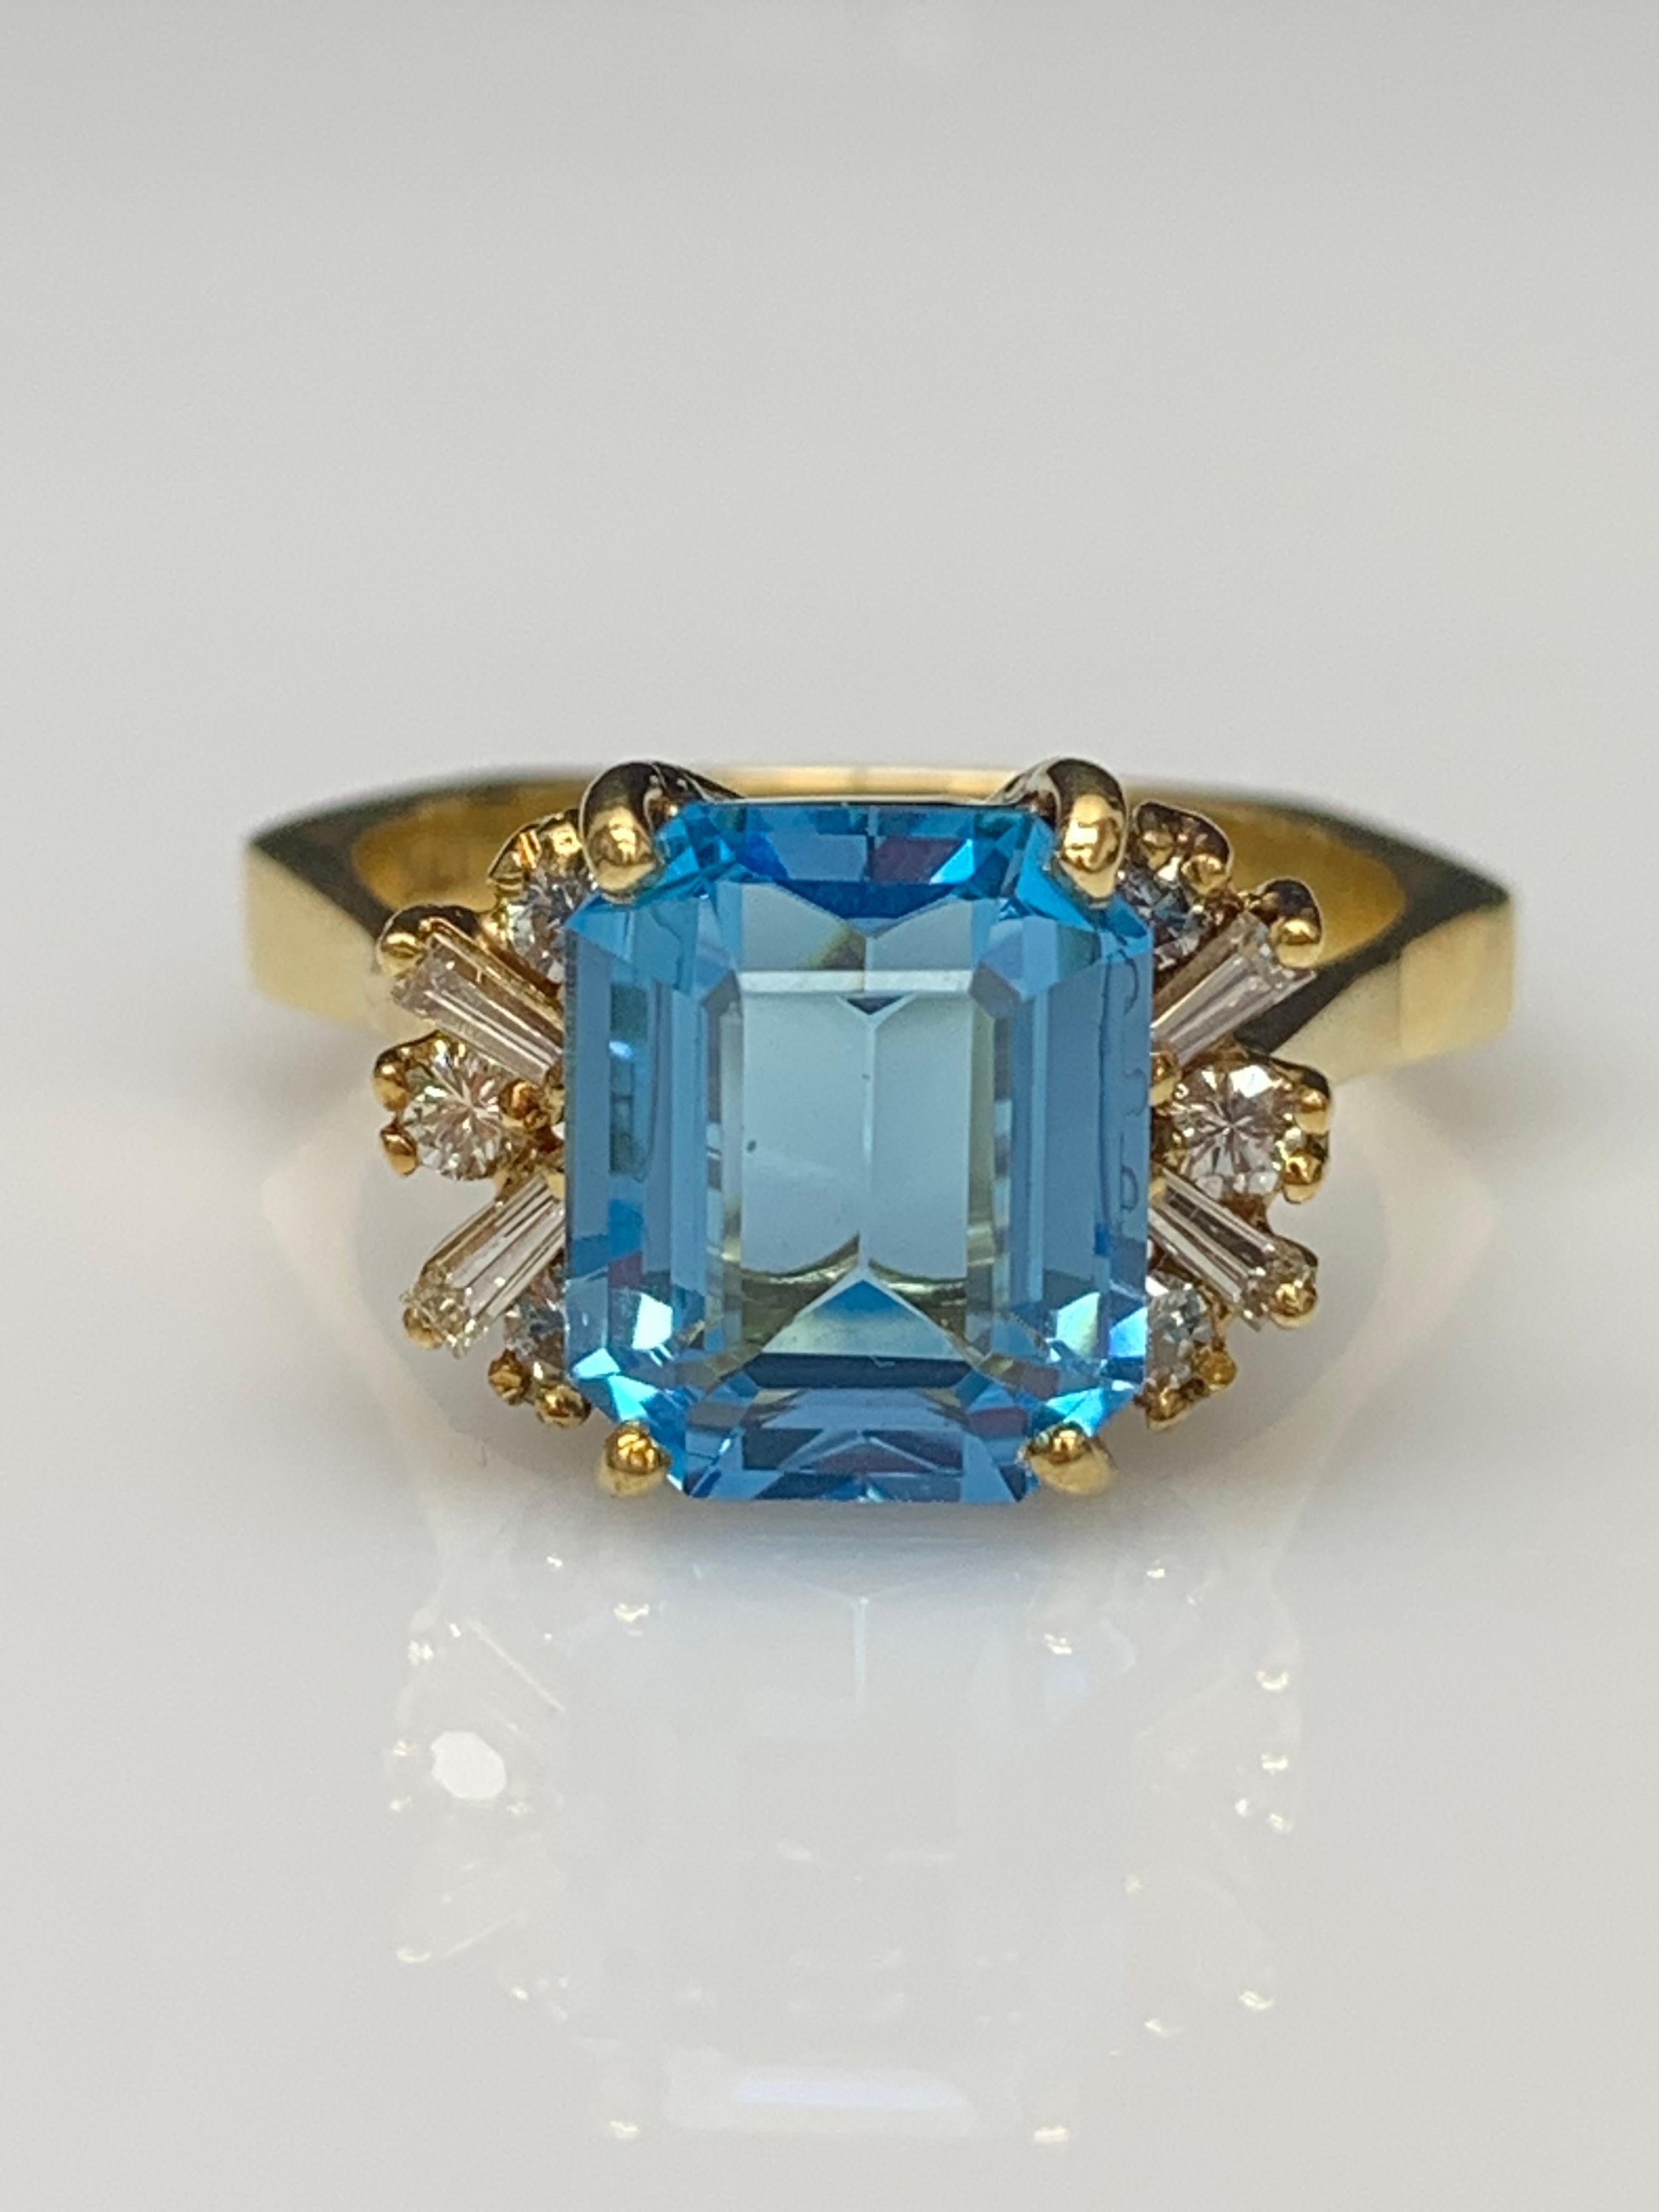 Modern 3.98 Carat Emerald Cut Blue Topaz and Diamond Ring in 14K Yellow Gold For Sale